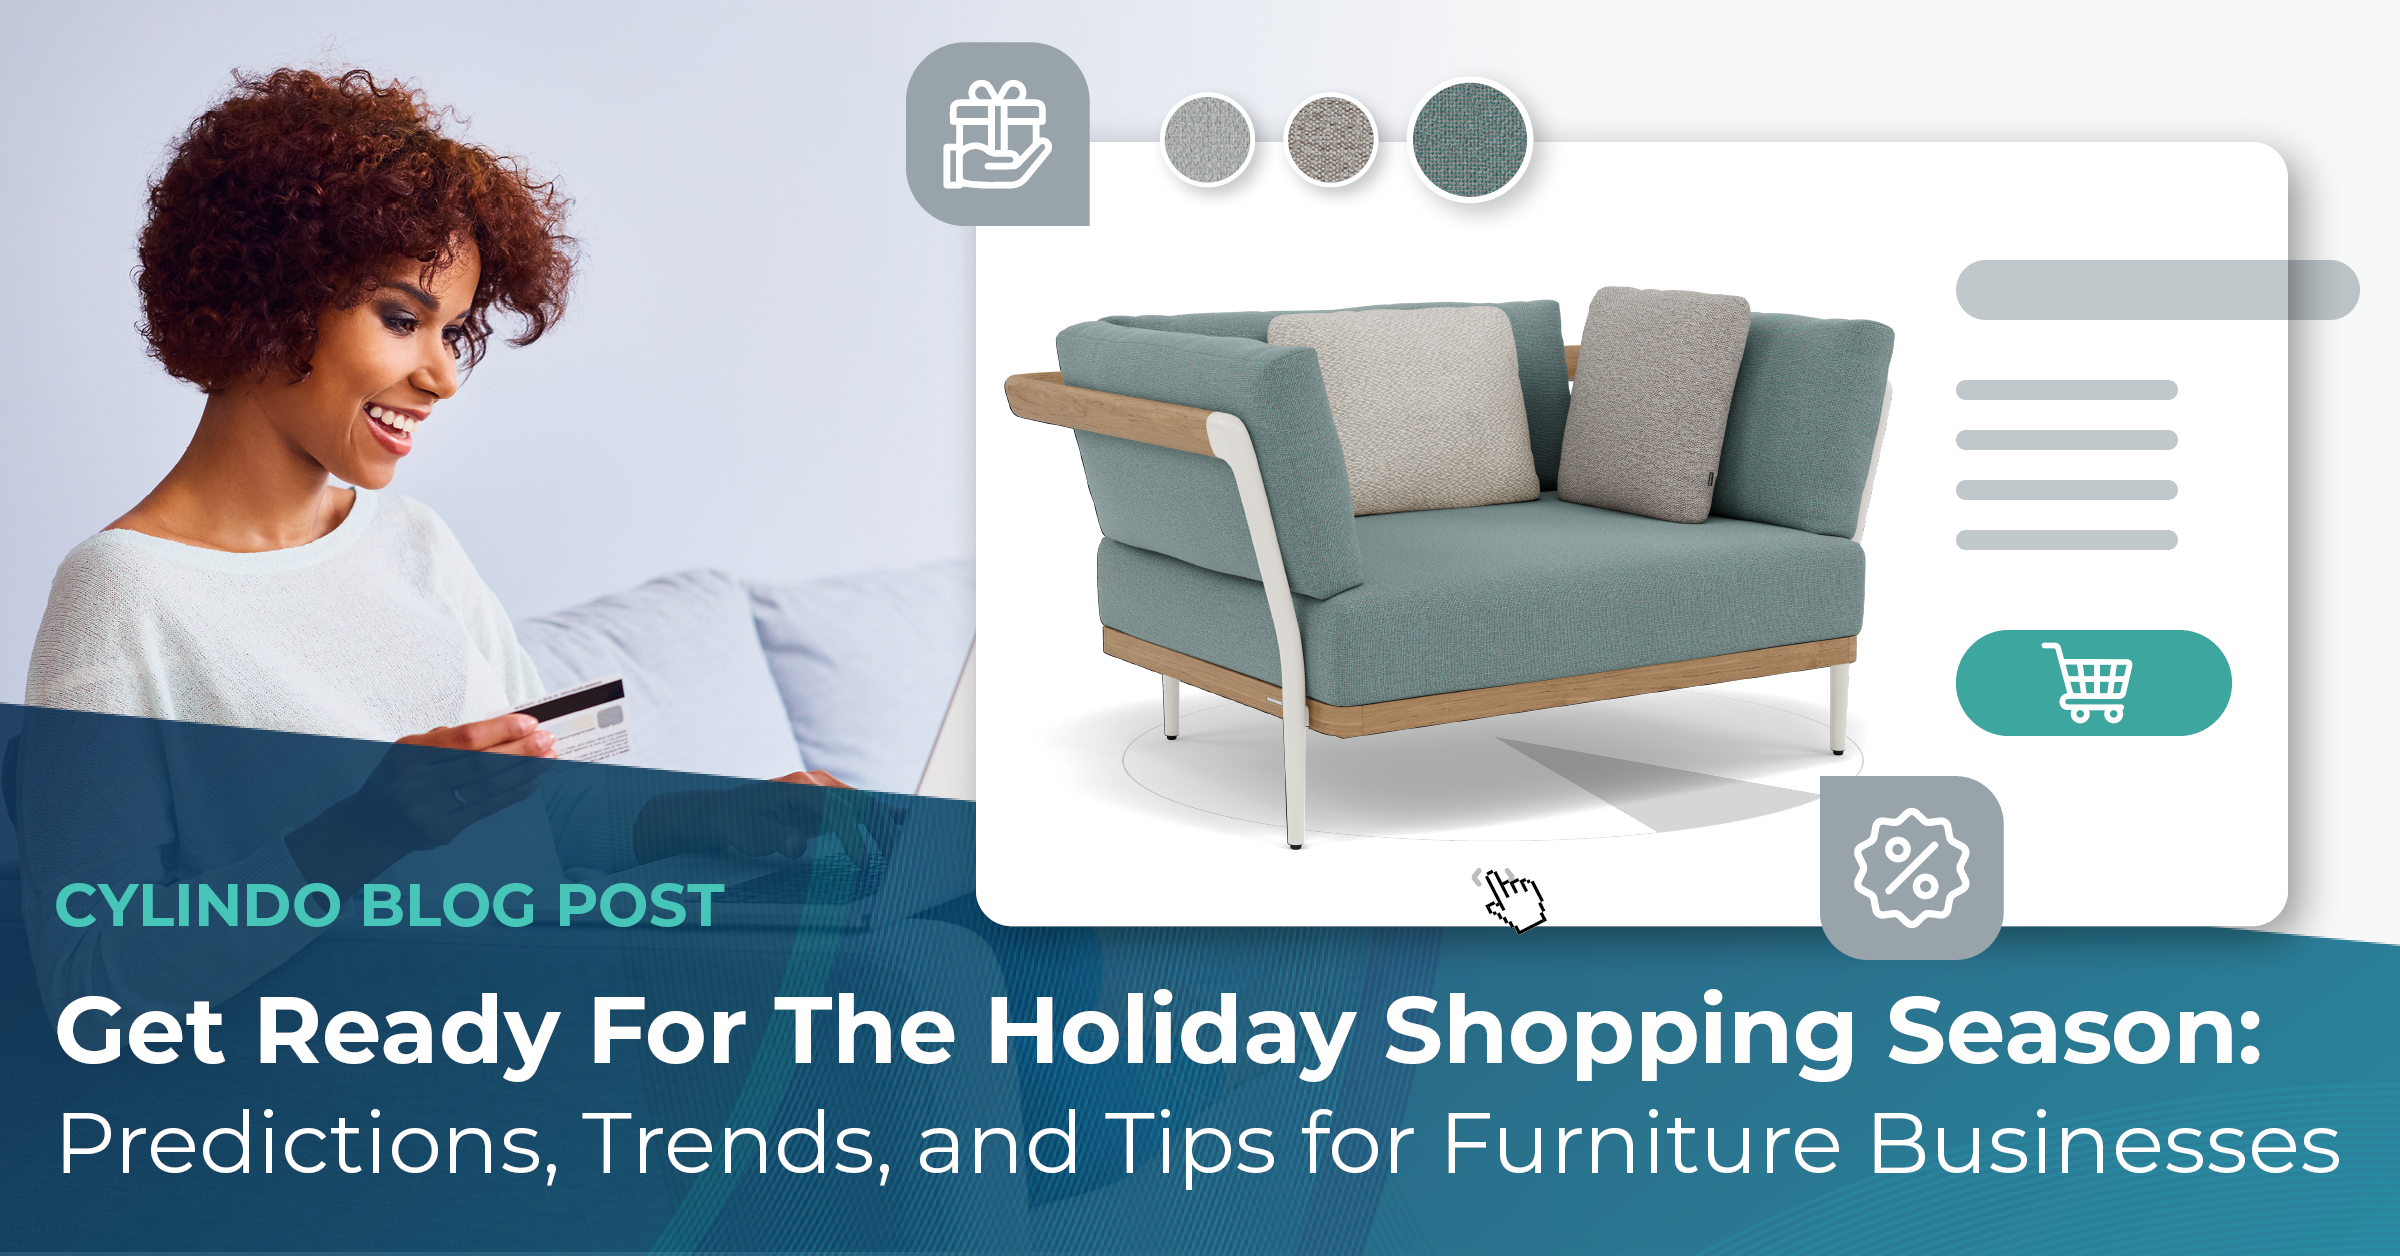 Get Ready for the Holiday Shopping Season: Predictions, Trends, and Tips for Furniture Businesses